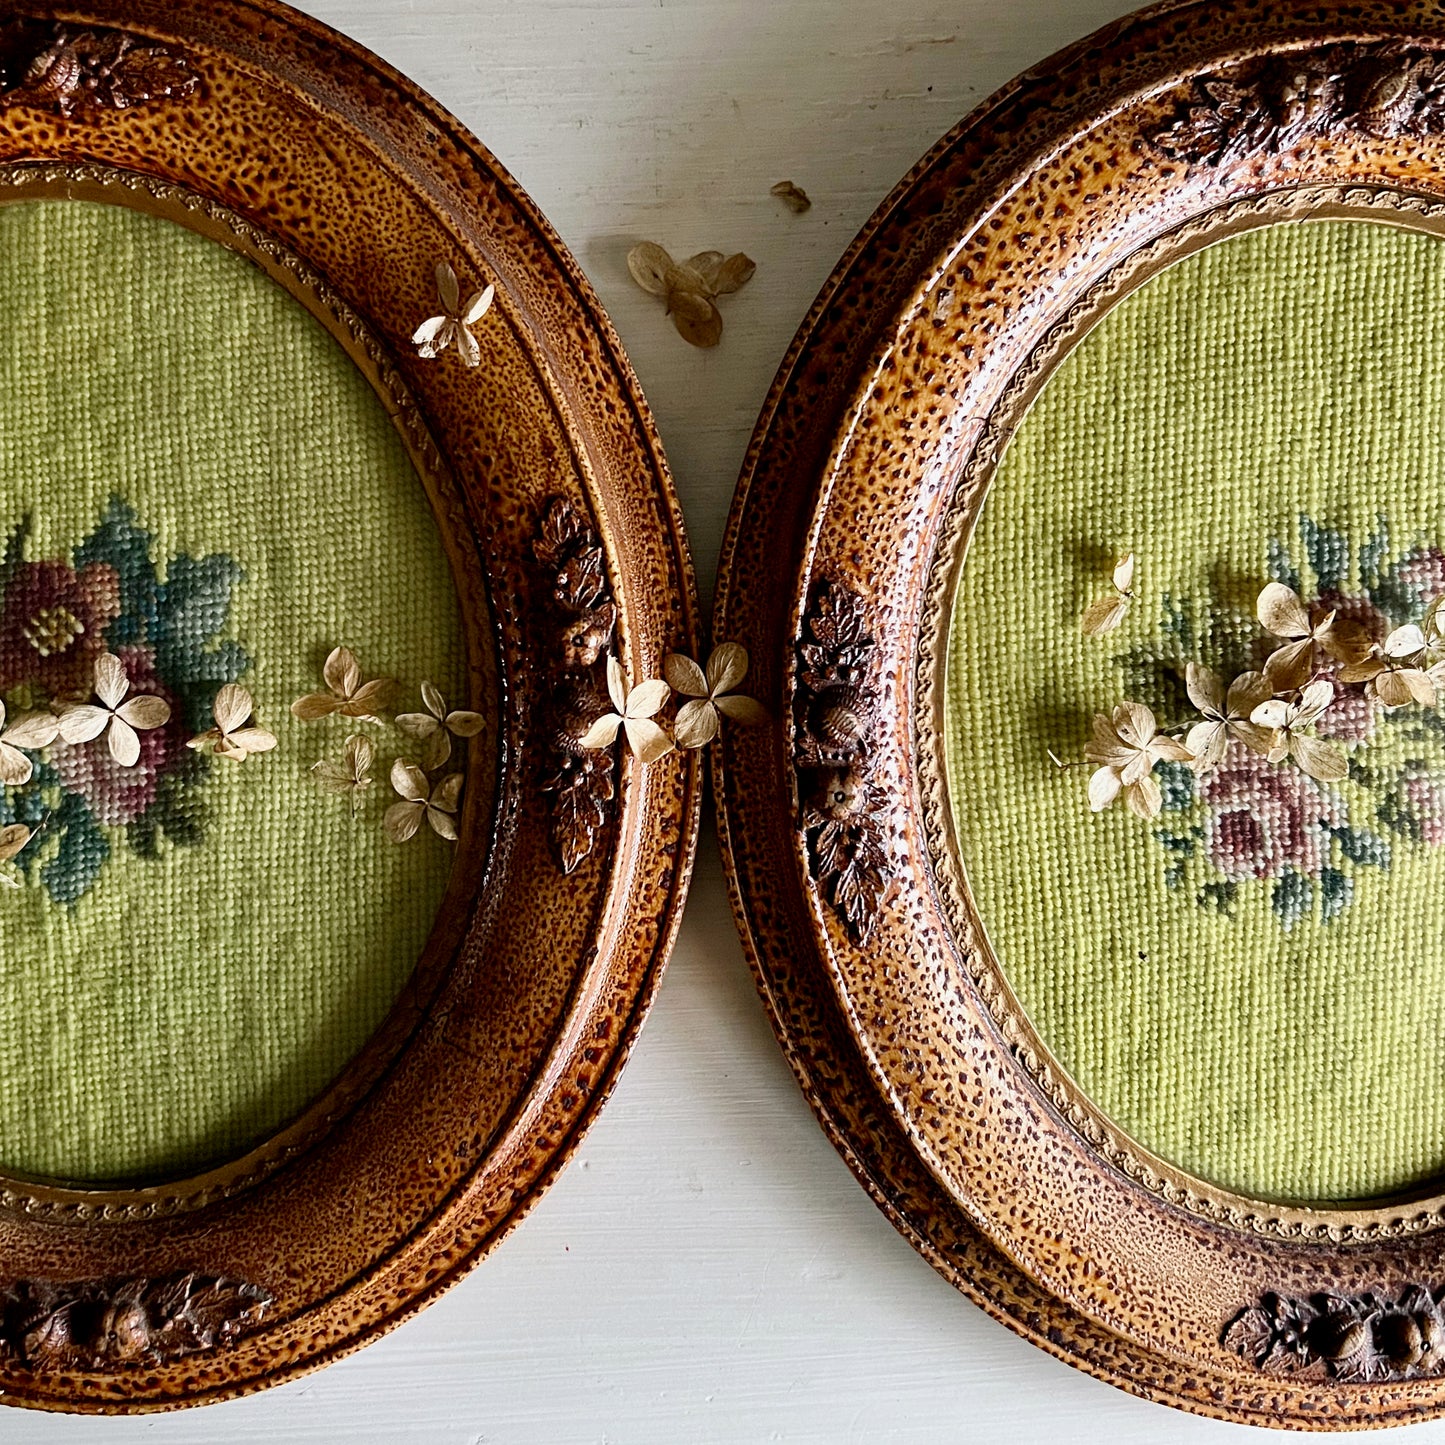 Antique Chartreuse Floral Needlepoint in Wooden Frames, Set of 2 (c.1900s)